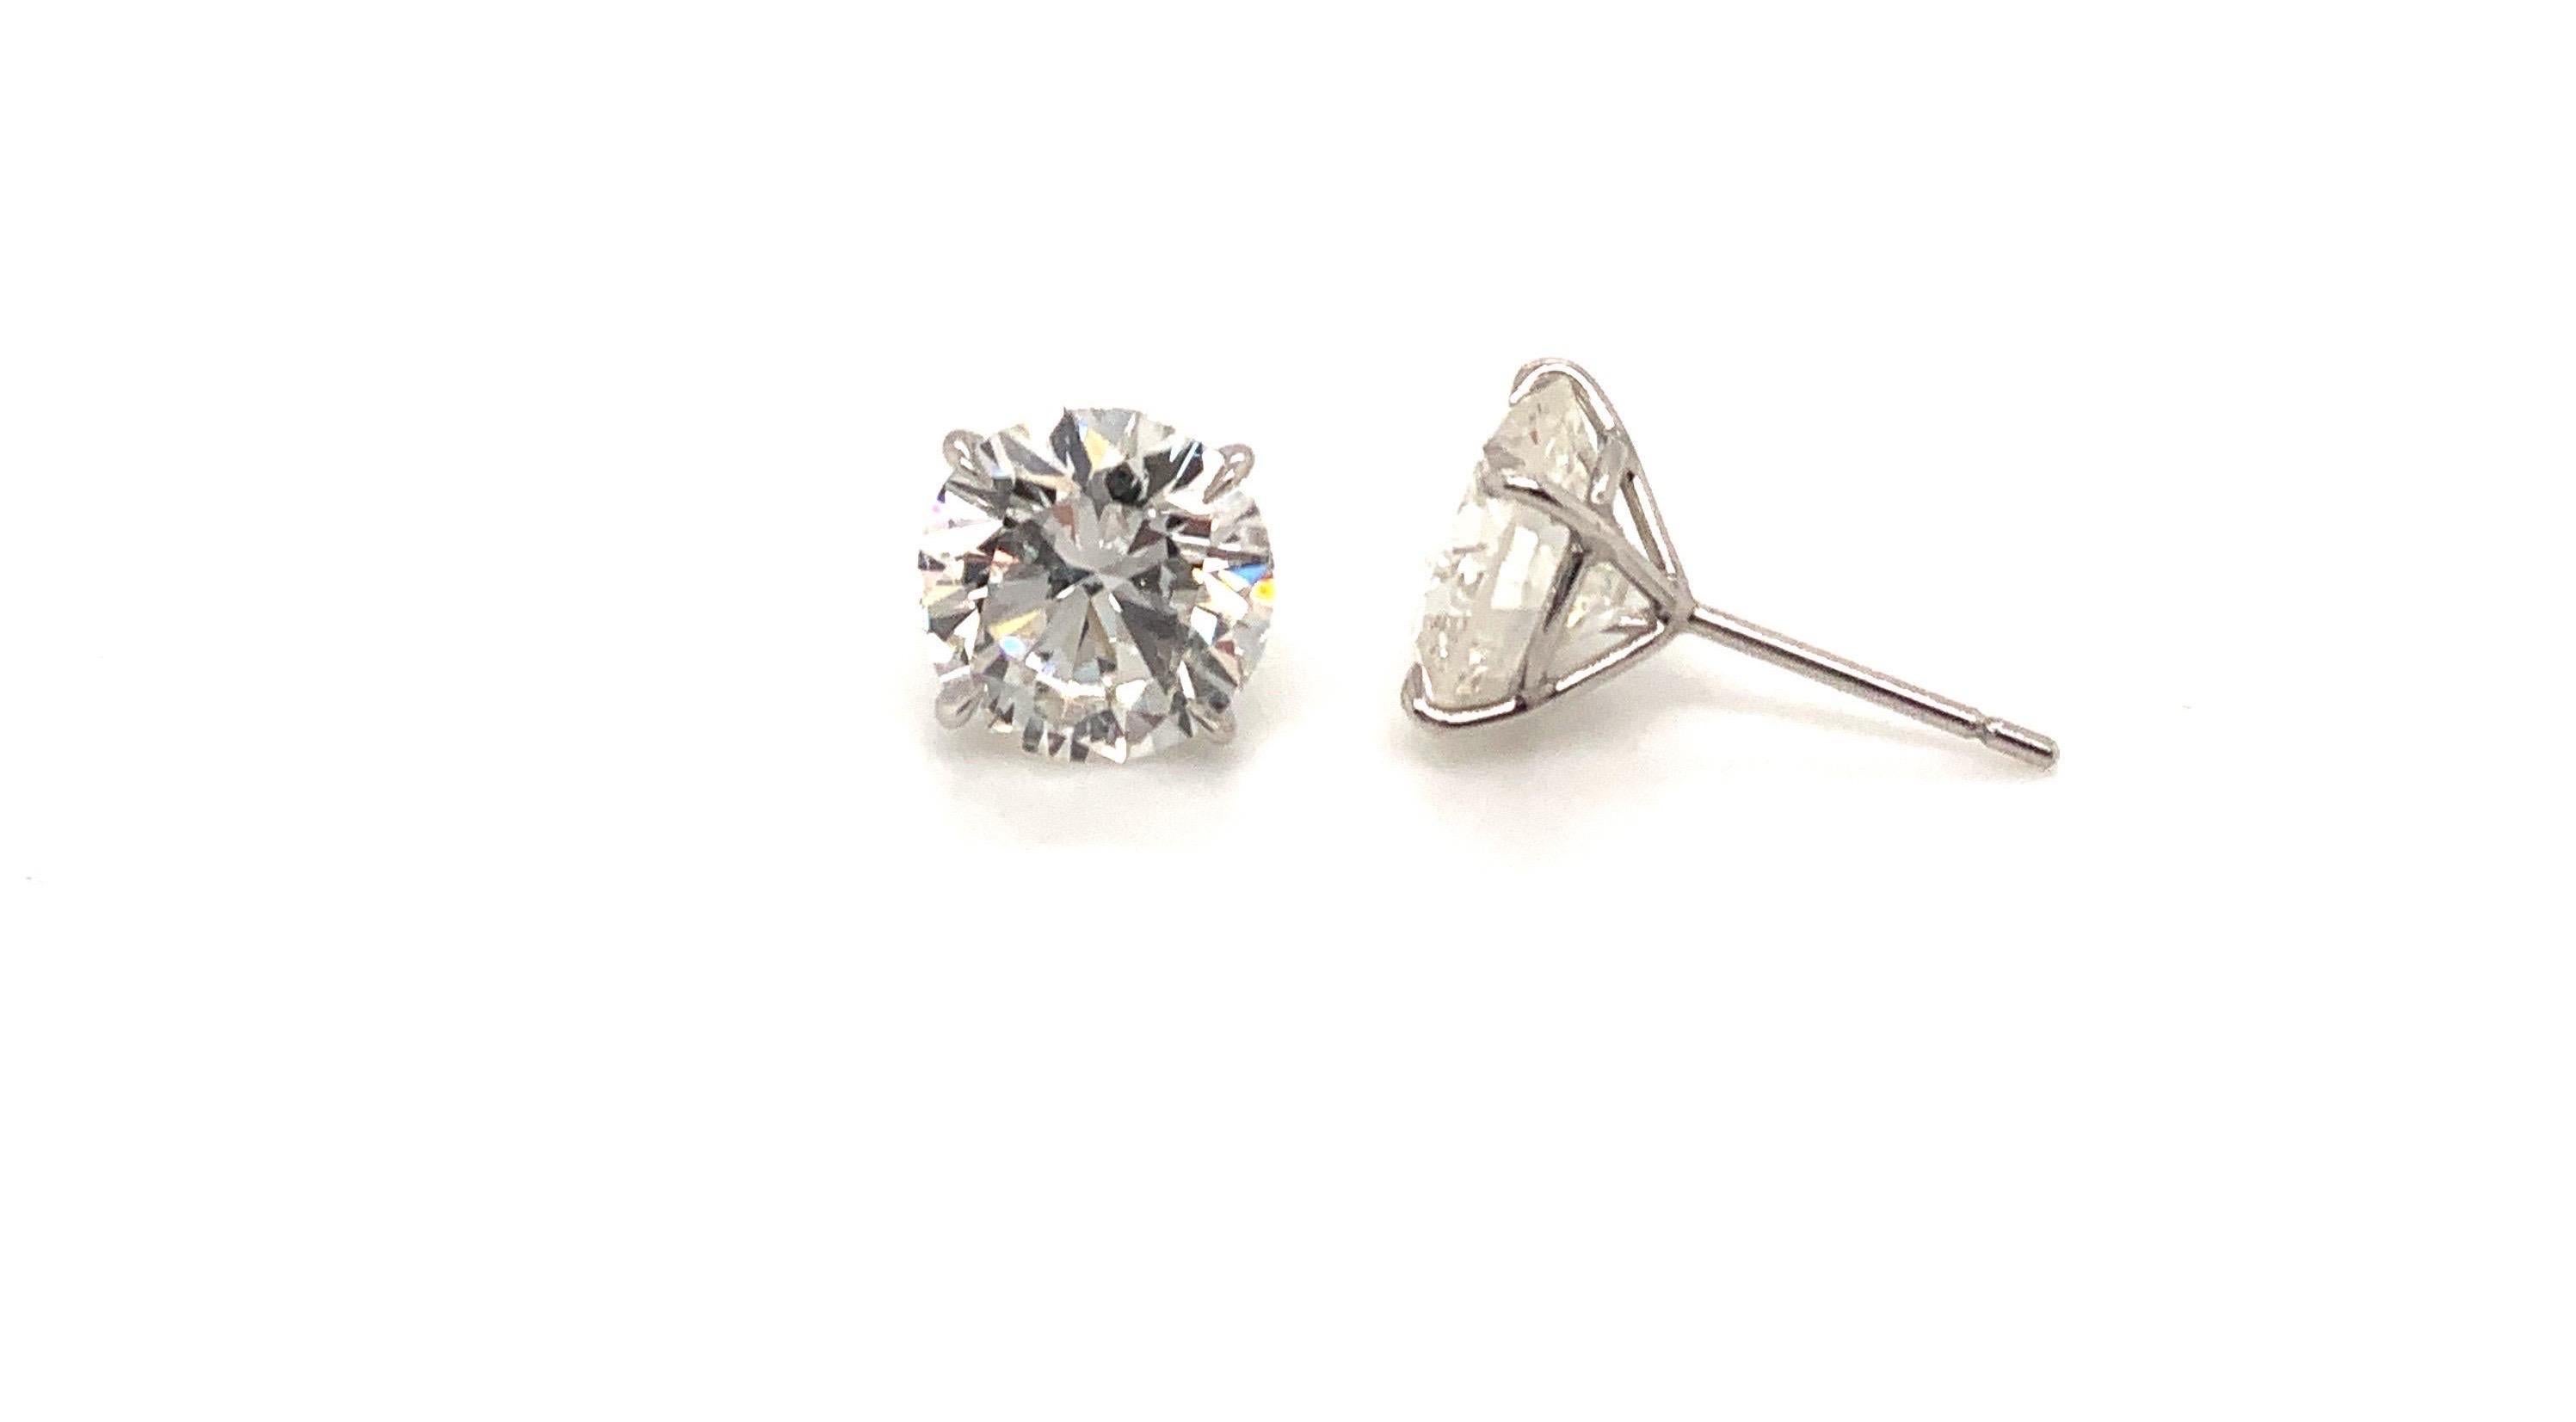 Stunning pair of GIA Certified Round brilliant cut Diamond Stud Earrings
Set in hand made platinum on a four prong mounting. The Diamonds in these earrings we’re carefully selected to create the perfect match for these timeless earrings
8.06 total